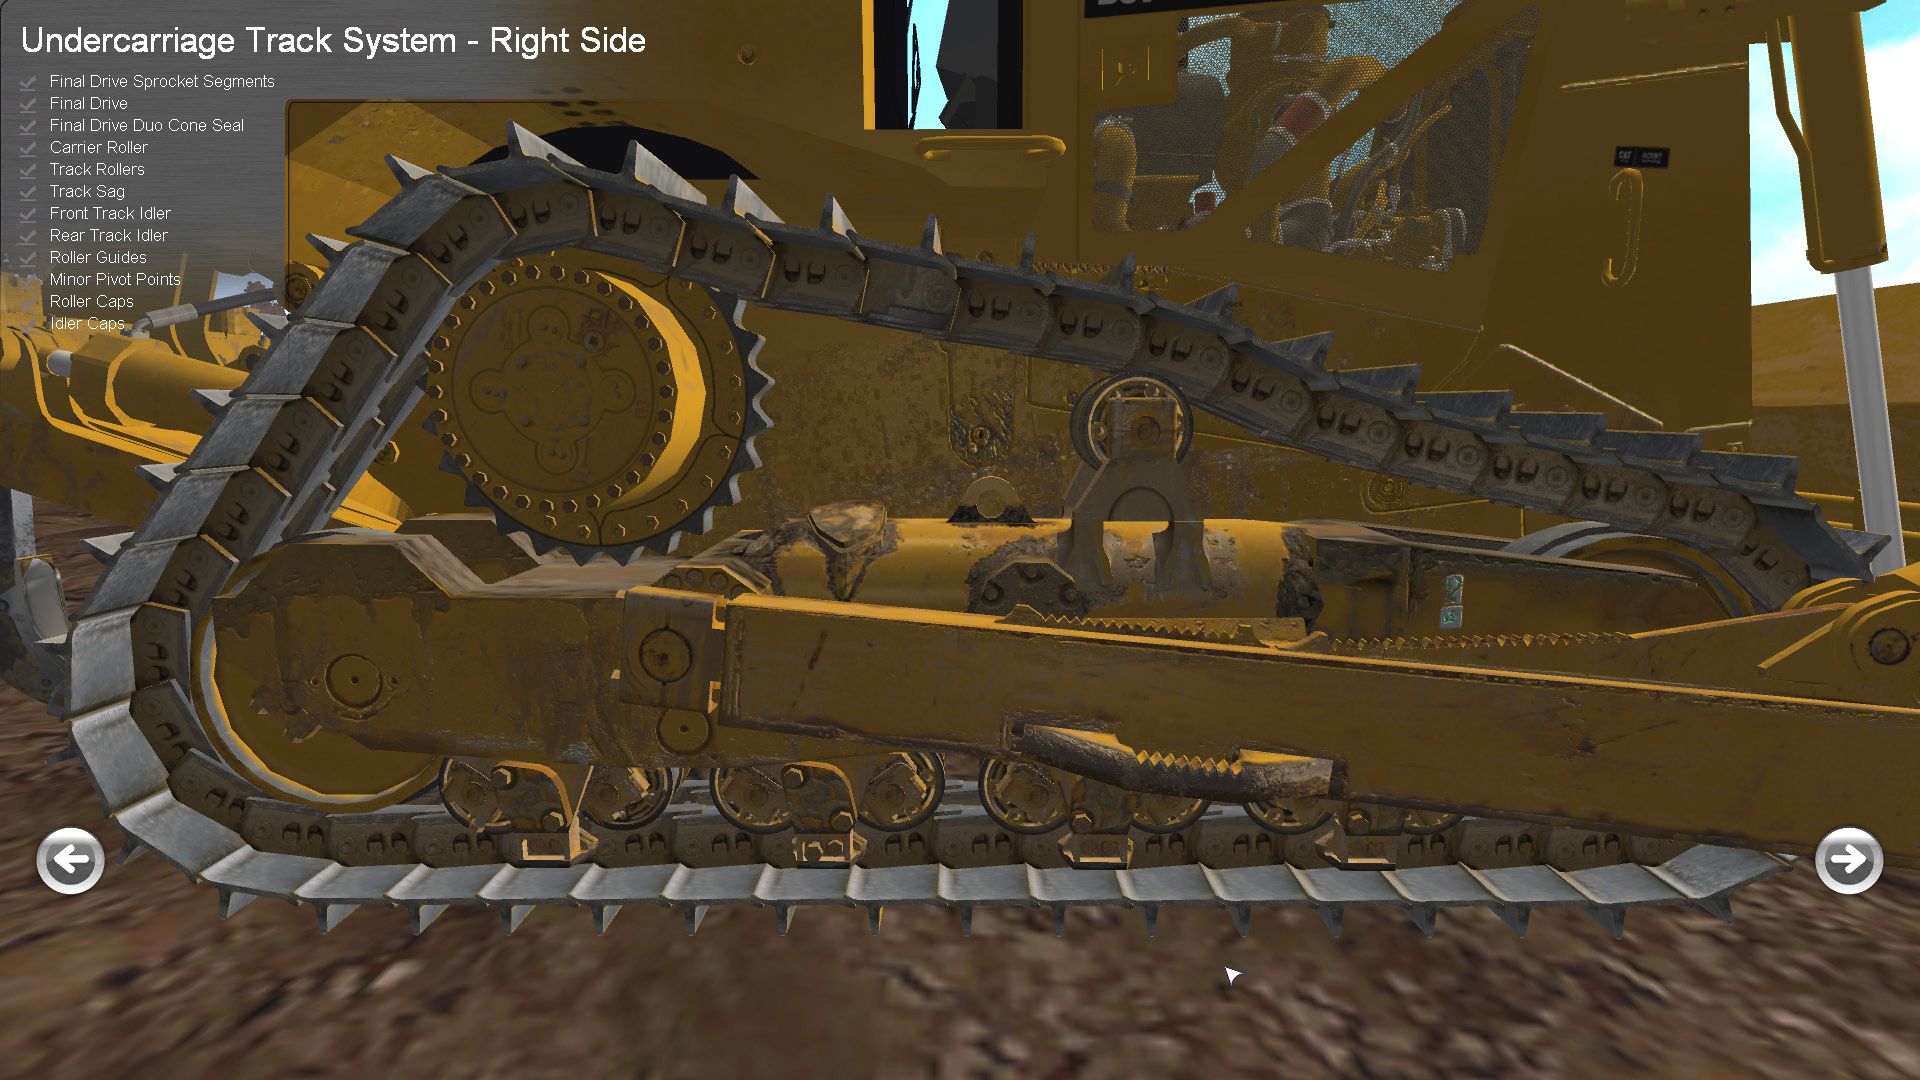 Cat offers simulation software to train heavy equipment operators ...